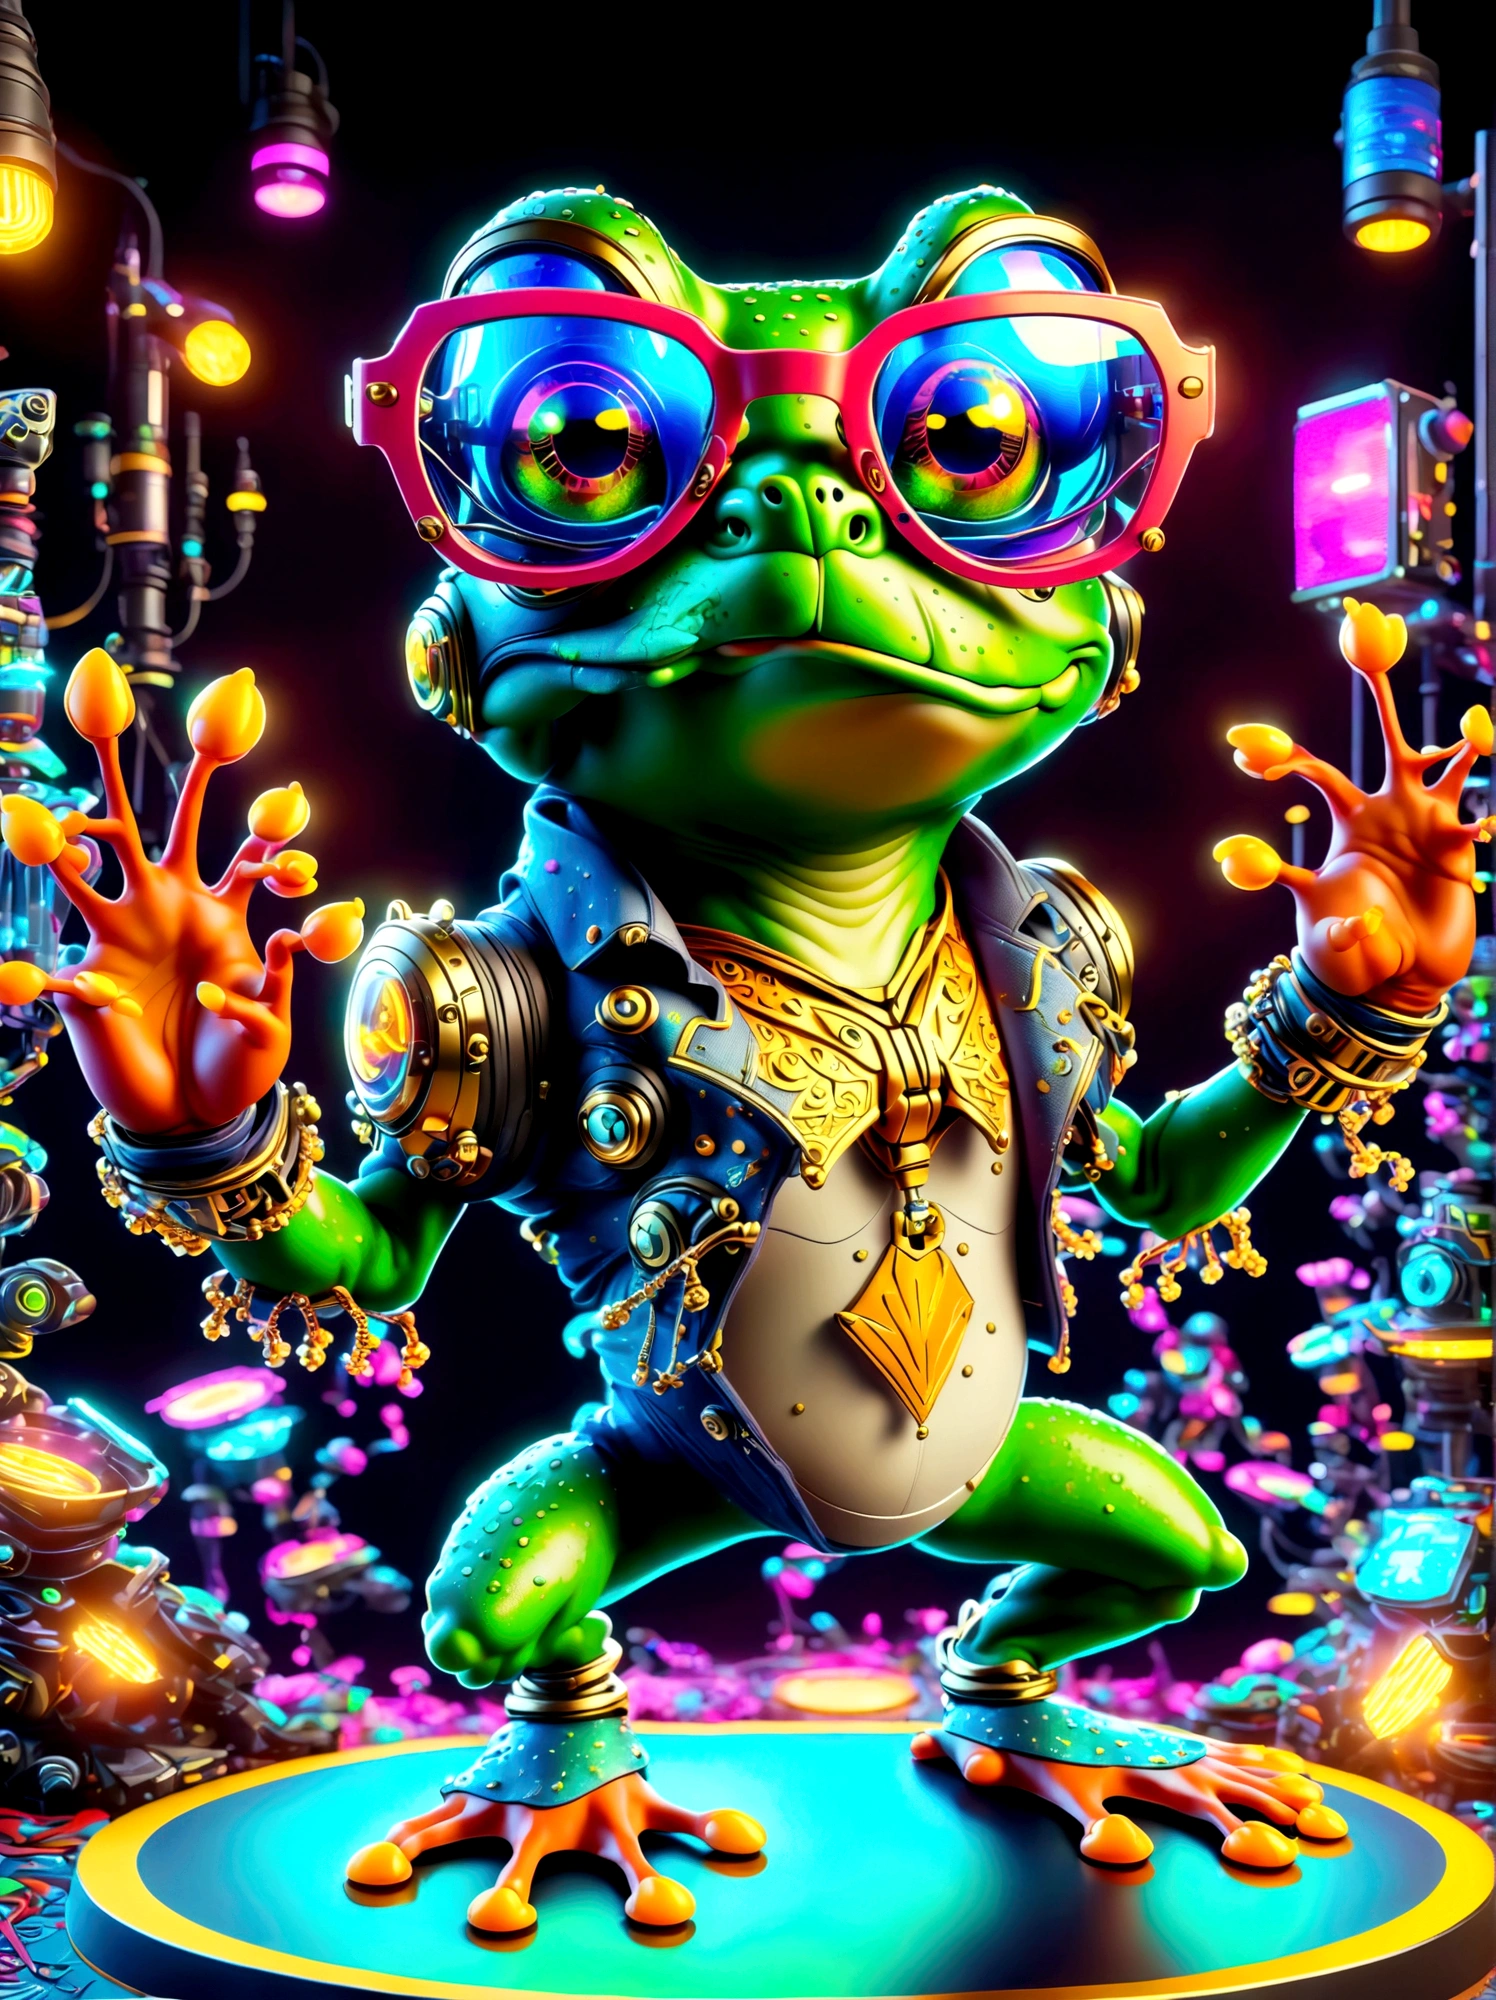 (Frog wearing big glasses:1.3), A digital illustration depicting a green cartoon frog in a dynamic dancing pose within a colorful virtual reality world teeming with neon lights and vibrant holograms. The scene bears the influences of both pop art and graffiti, a truly cyberpunk-inspired ensemble with explosive energy, created using digital painting methods and radiant, glowing effects.